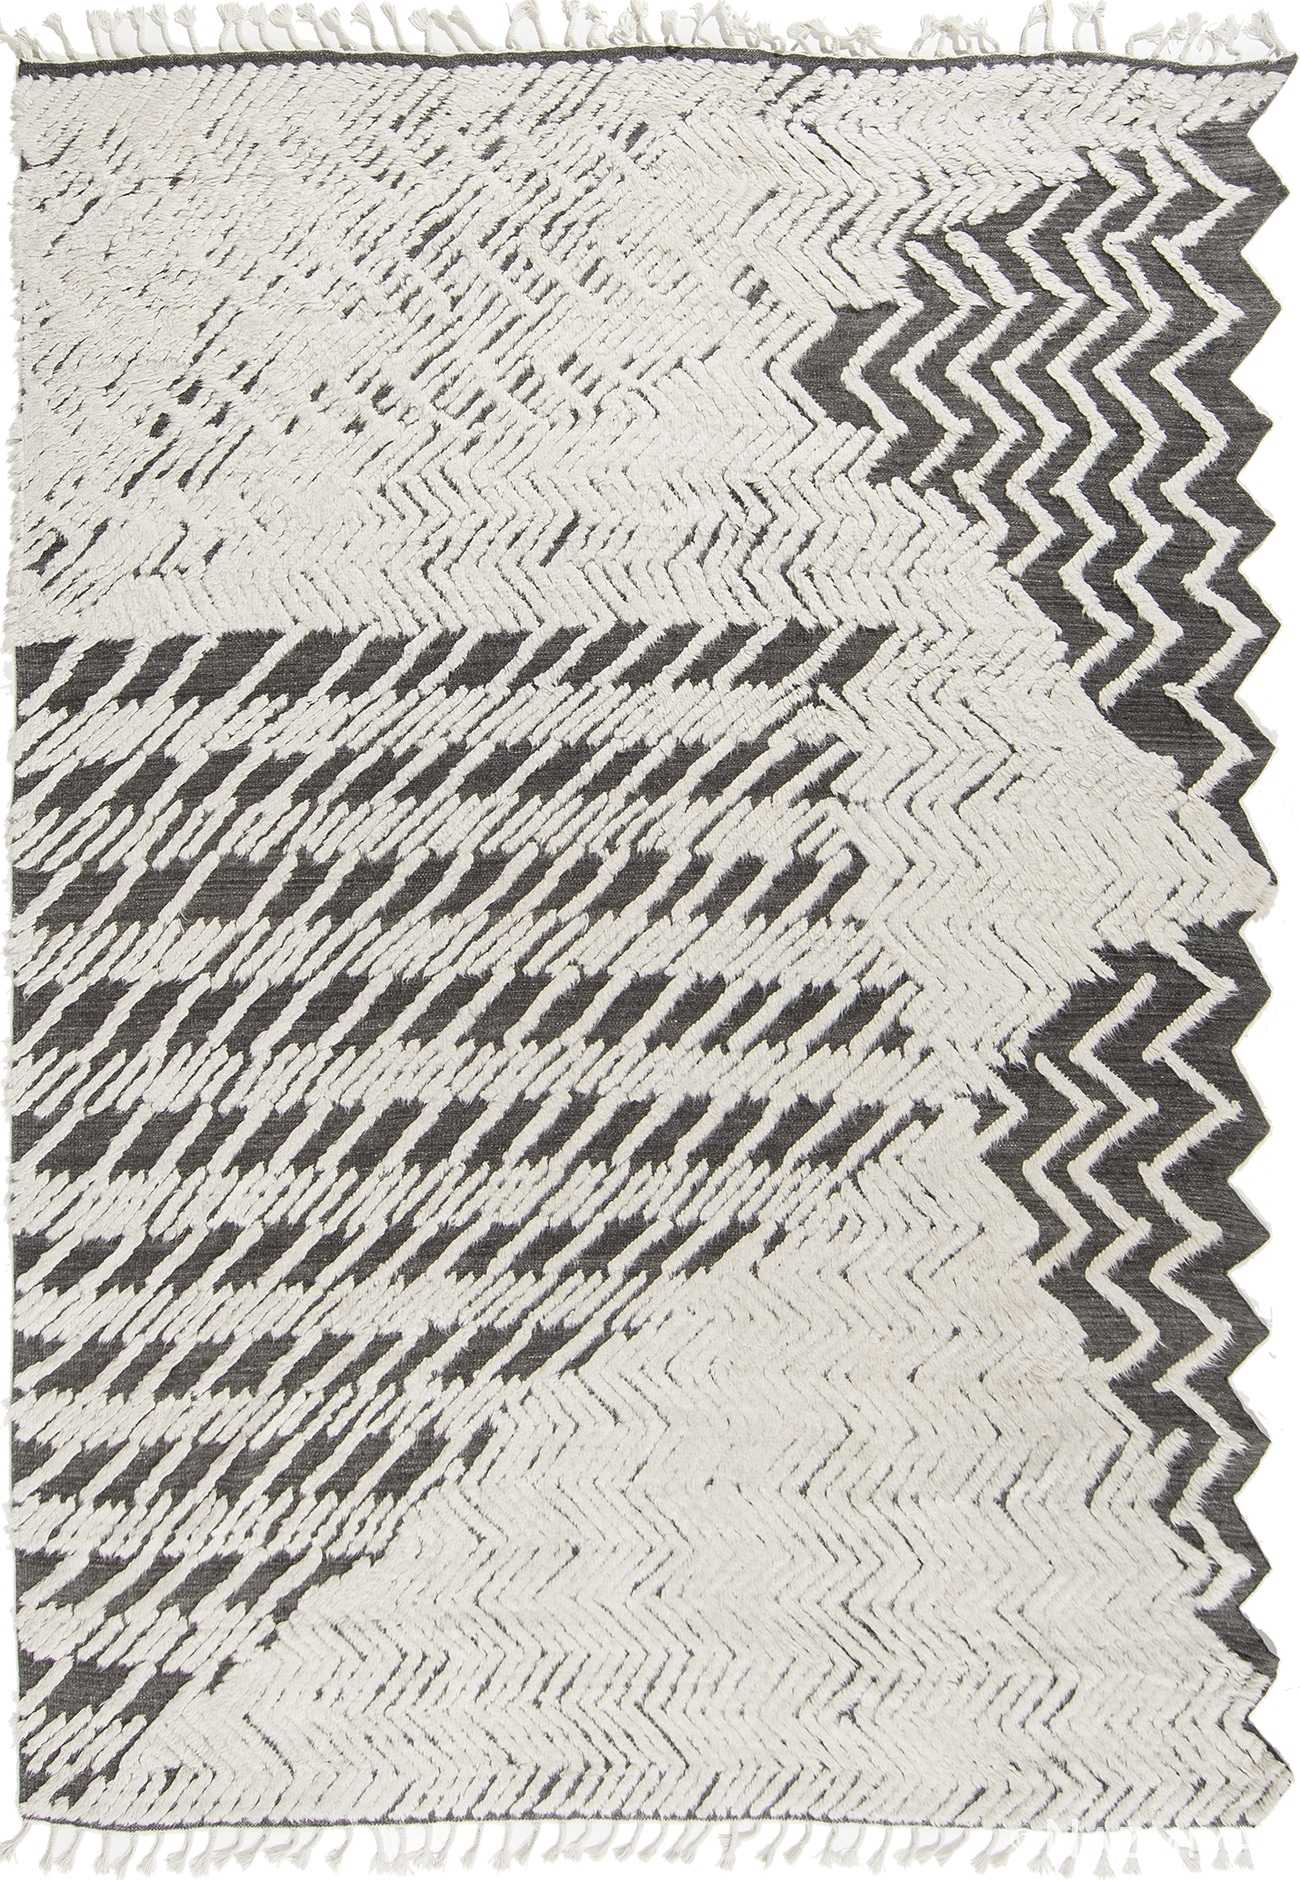 Modernist Collection Rug 172785967 by Nazmiyal NYC